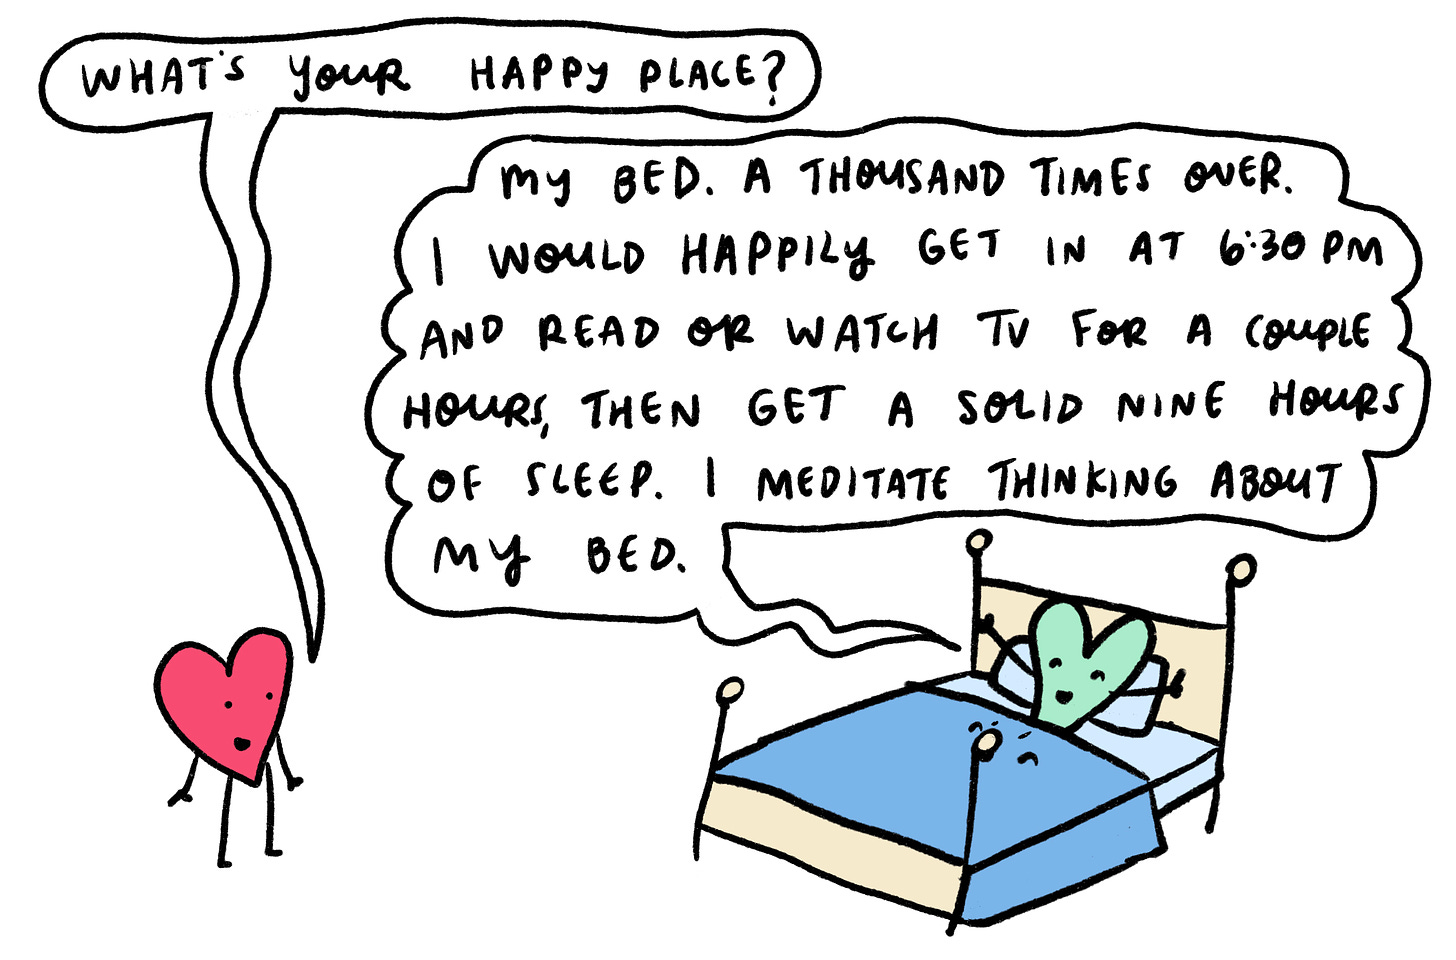 What’s your happy place? My bed. A thousand times over. I would happily get in at 6:30 p.m. and read or watch tv for a couple hours, then get a solid 9 hours of sleep. I meditate thinking about my bed. 